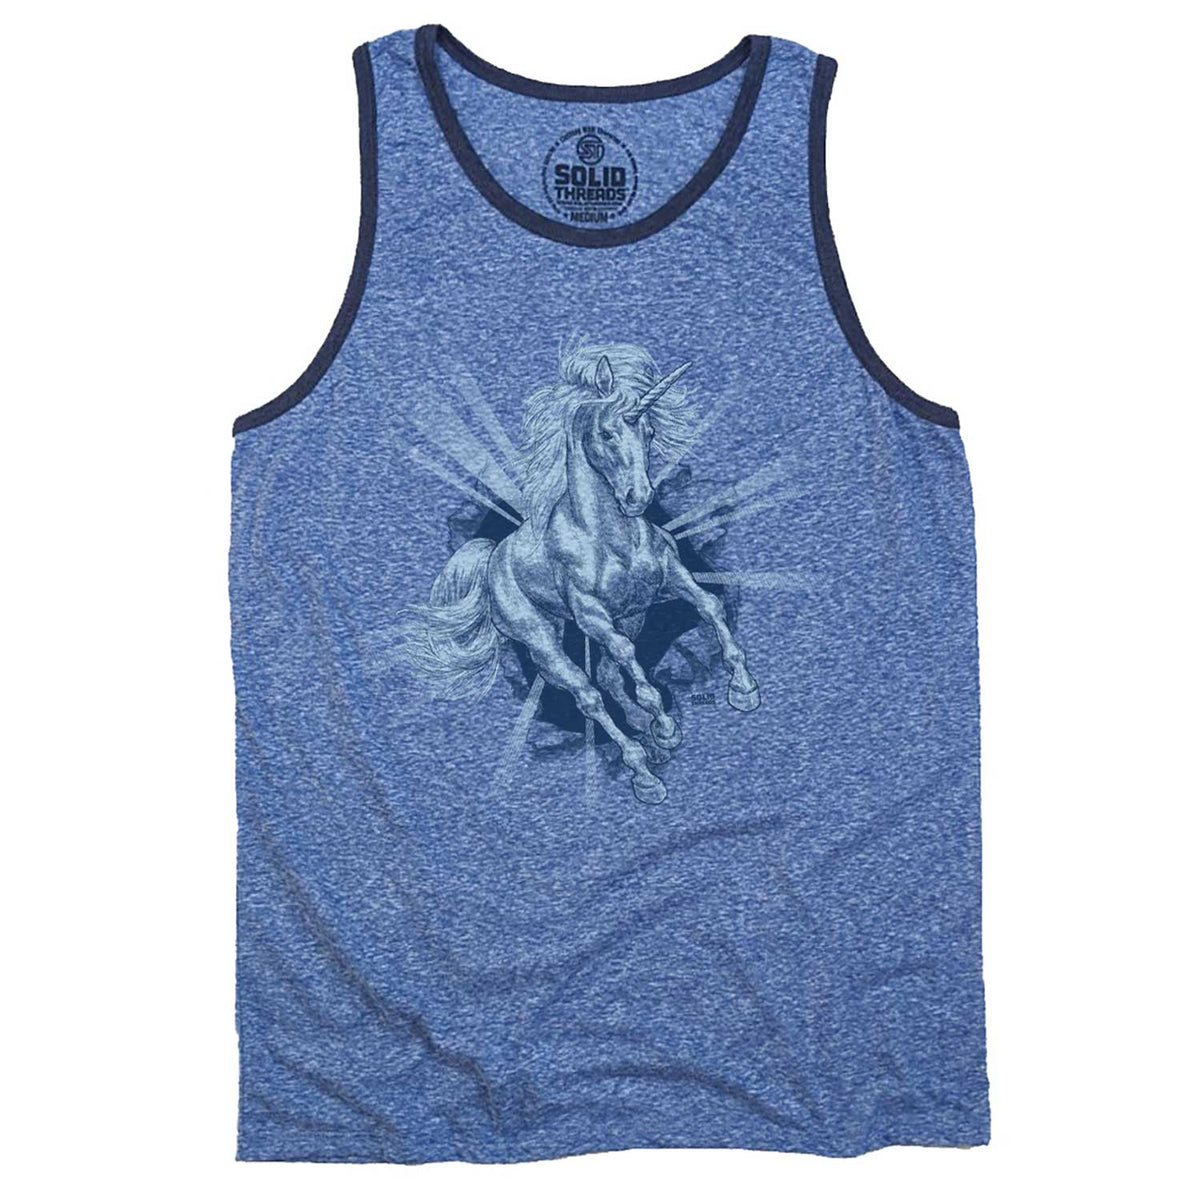 Men&#39;s Unicorn Chest Vintage Graphic Tank Top | Funny Mythical T-shirt | Solid Threads